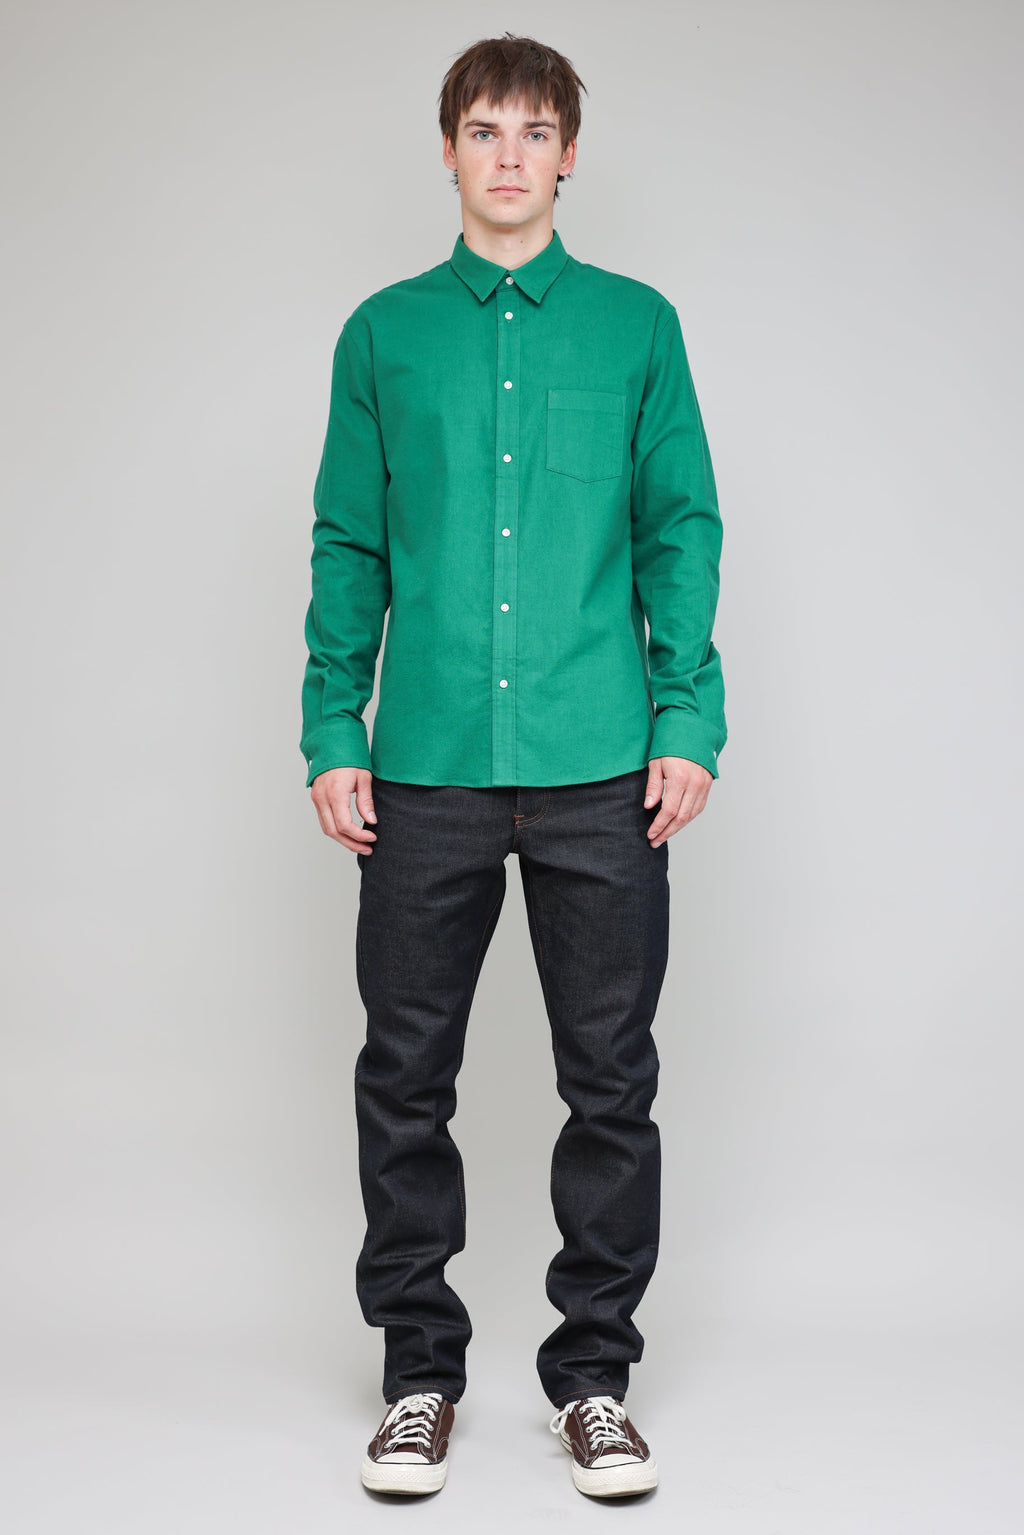 Japanese Flannel in Green 05